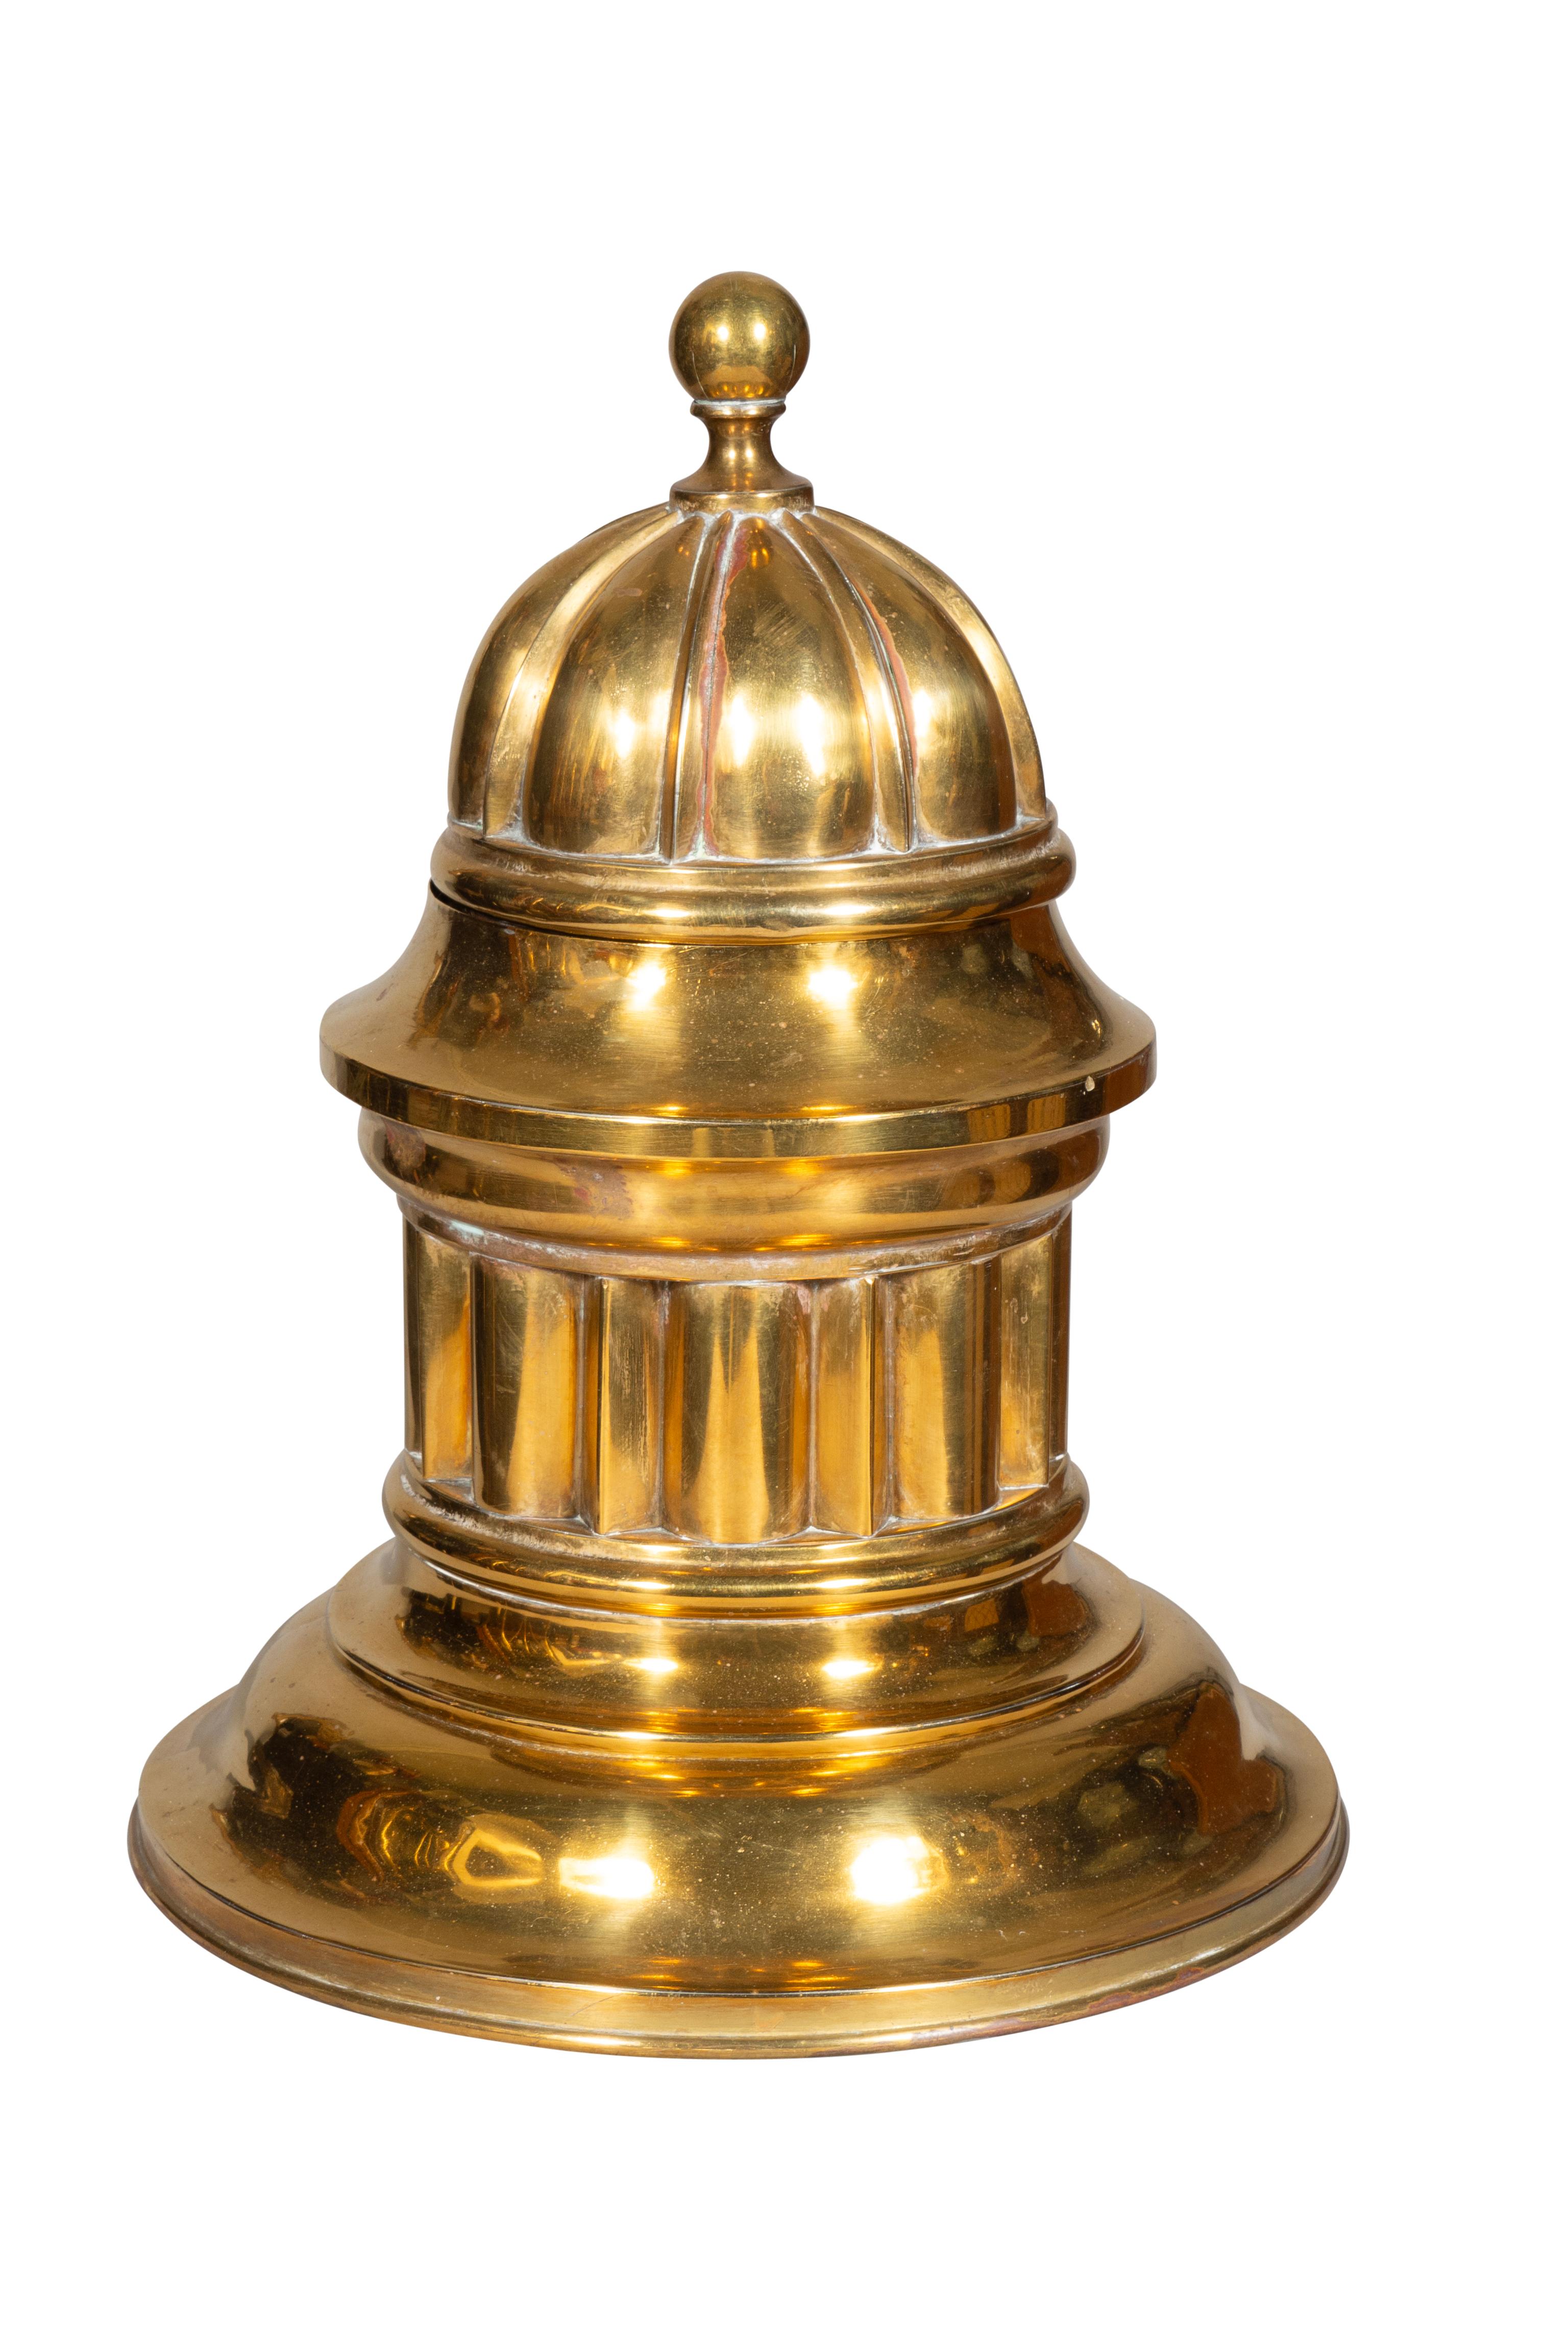 Victorian Brass Temple Form Match Safe In Good Condition For Sale In Essex, MA